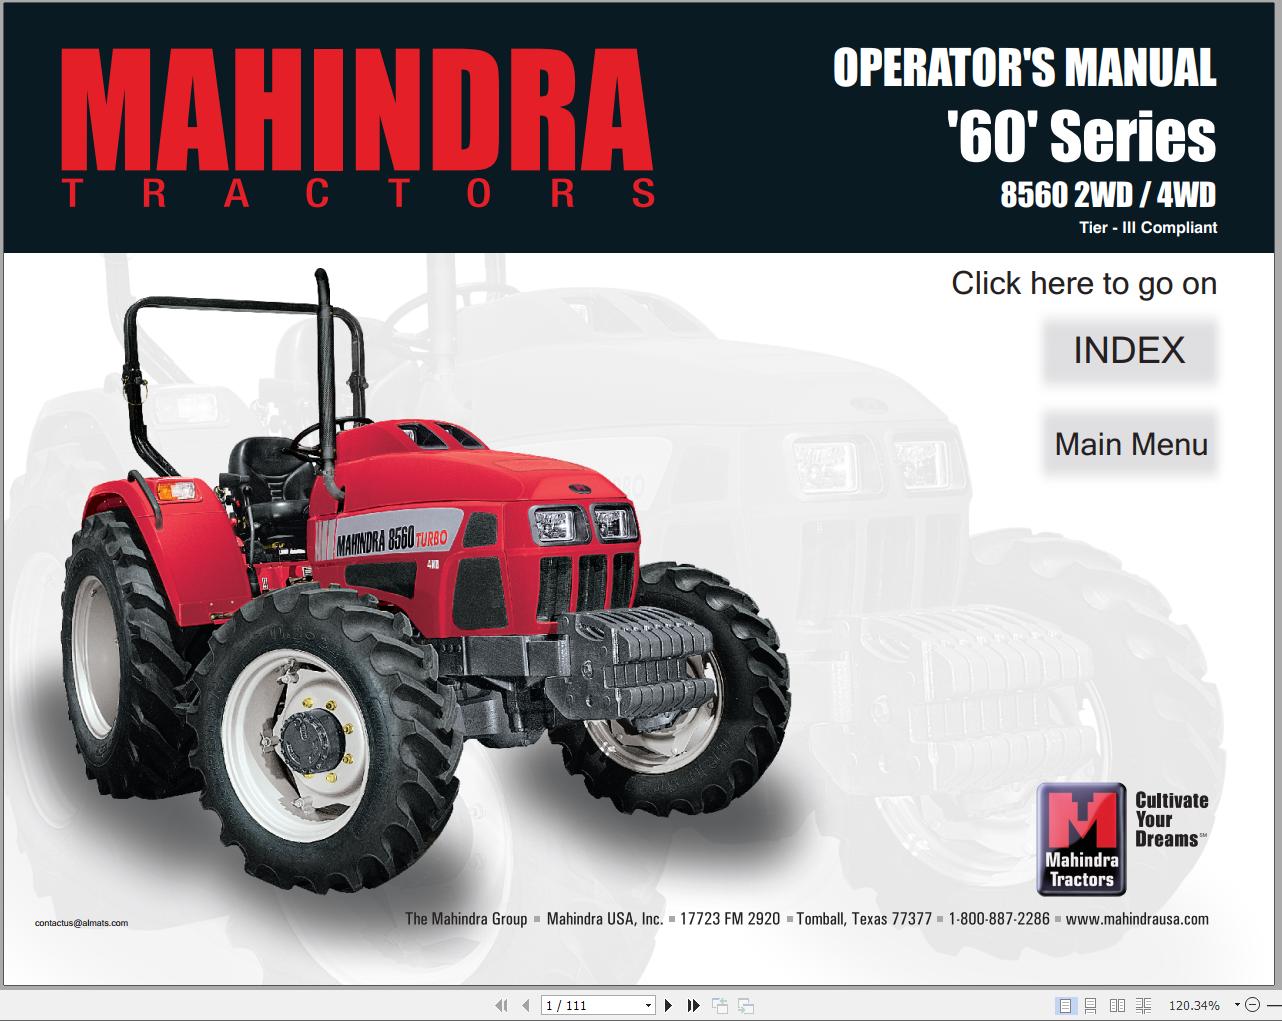 Mahindra Tractor 60 Series 8560 2WD 8560 4WD Full Operator Manual Fast Download